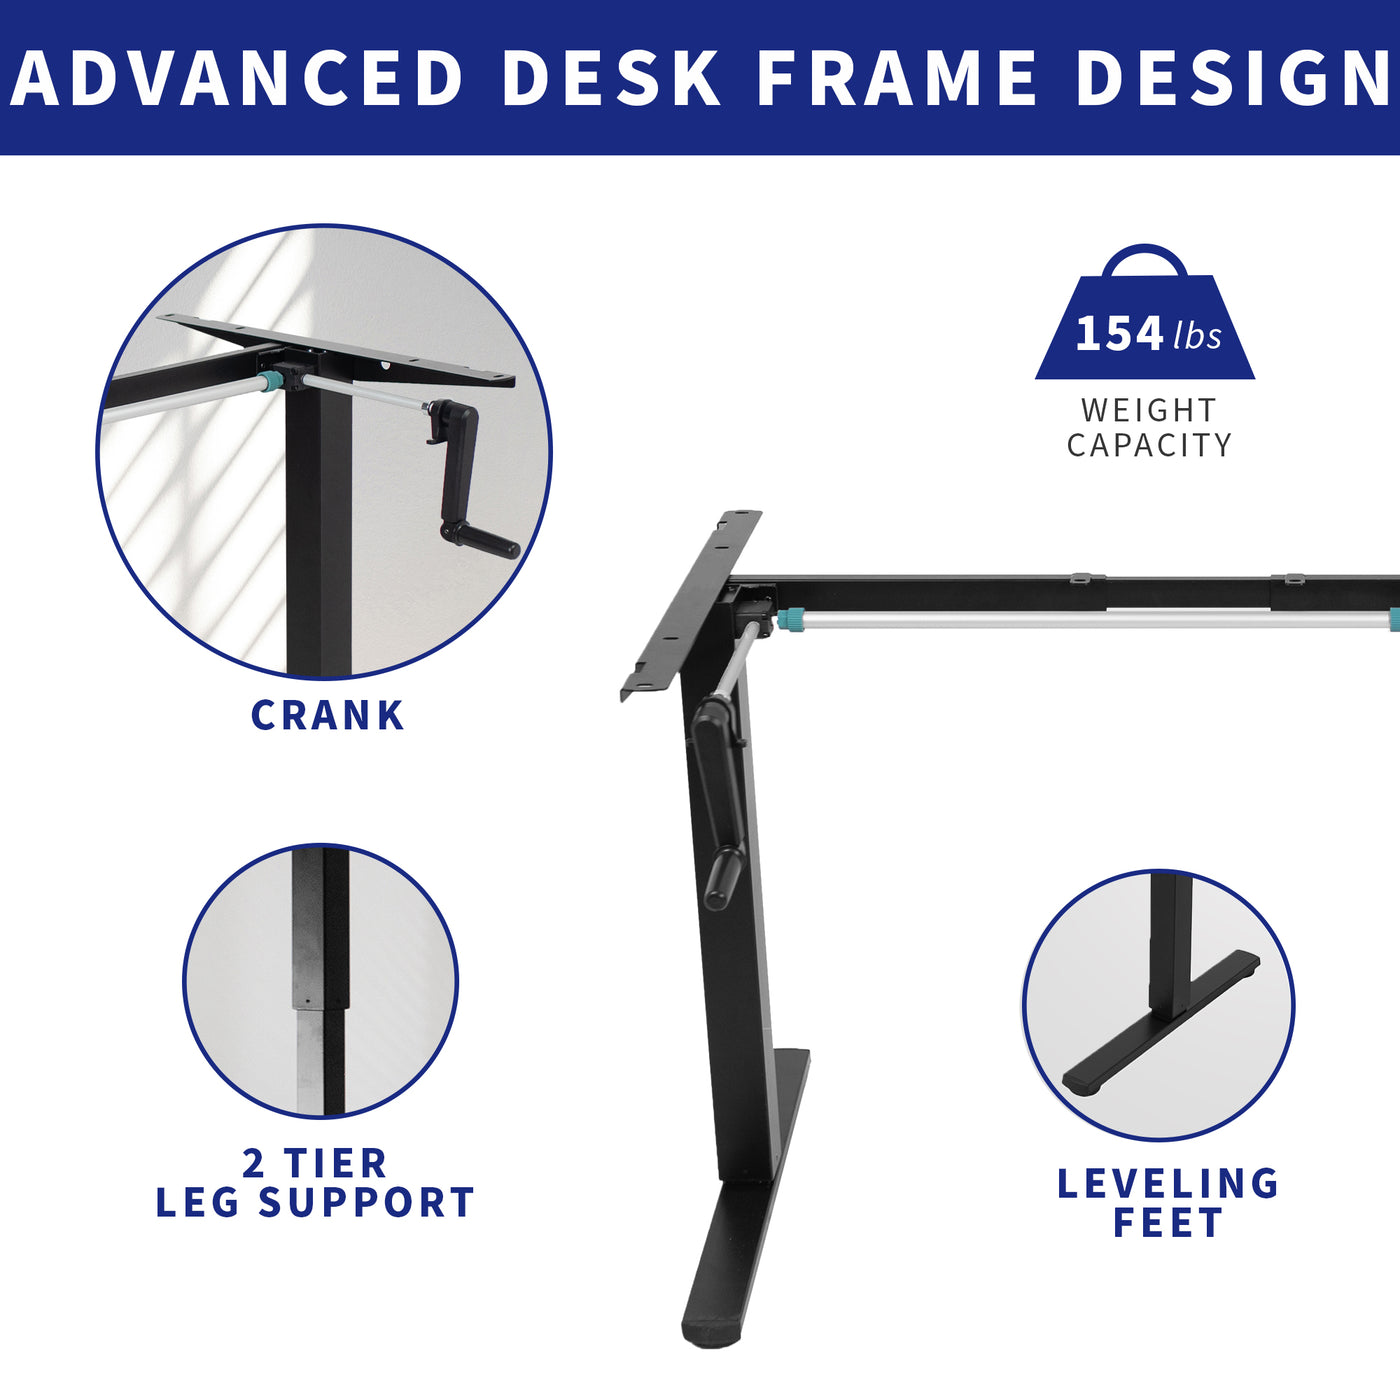 Advanced desk frame design with height adjustable crank, two-tier leg support, and leveling feet.